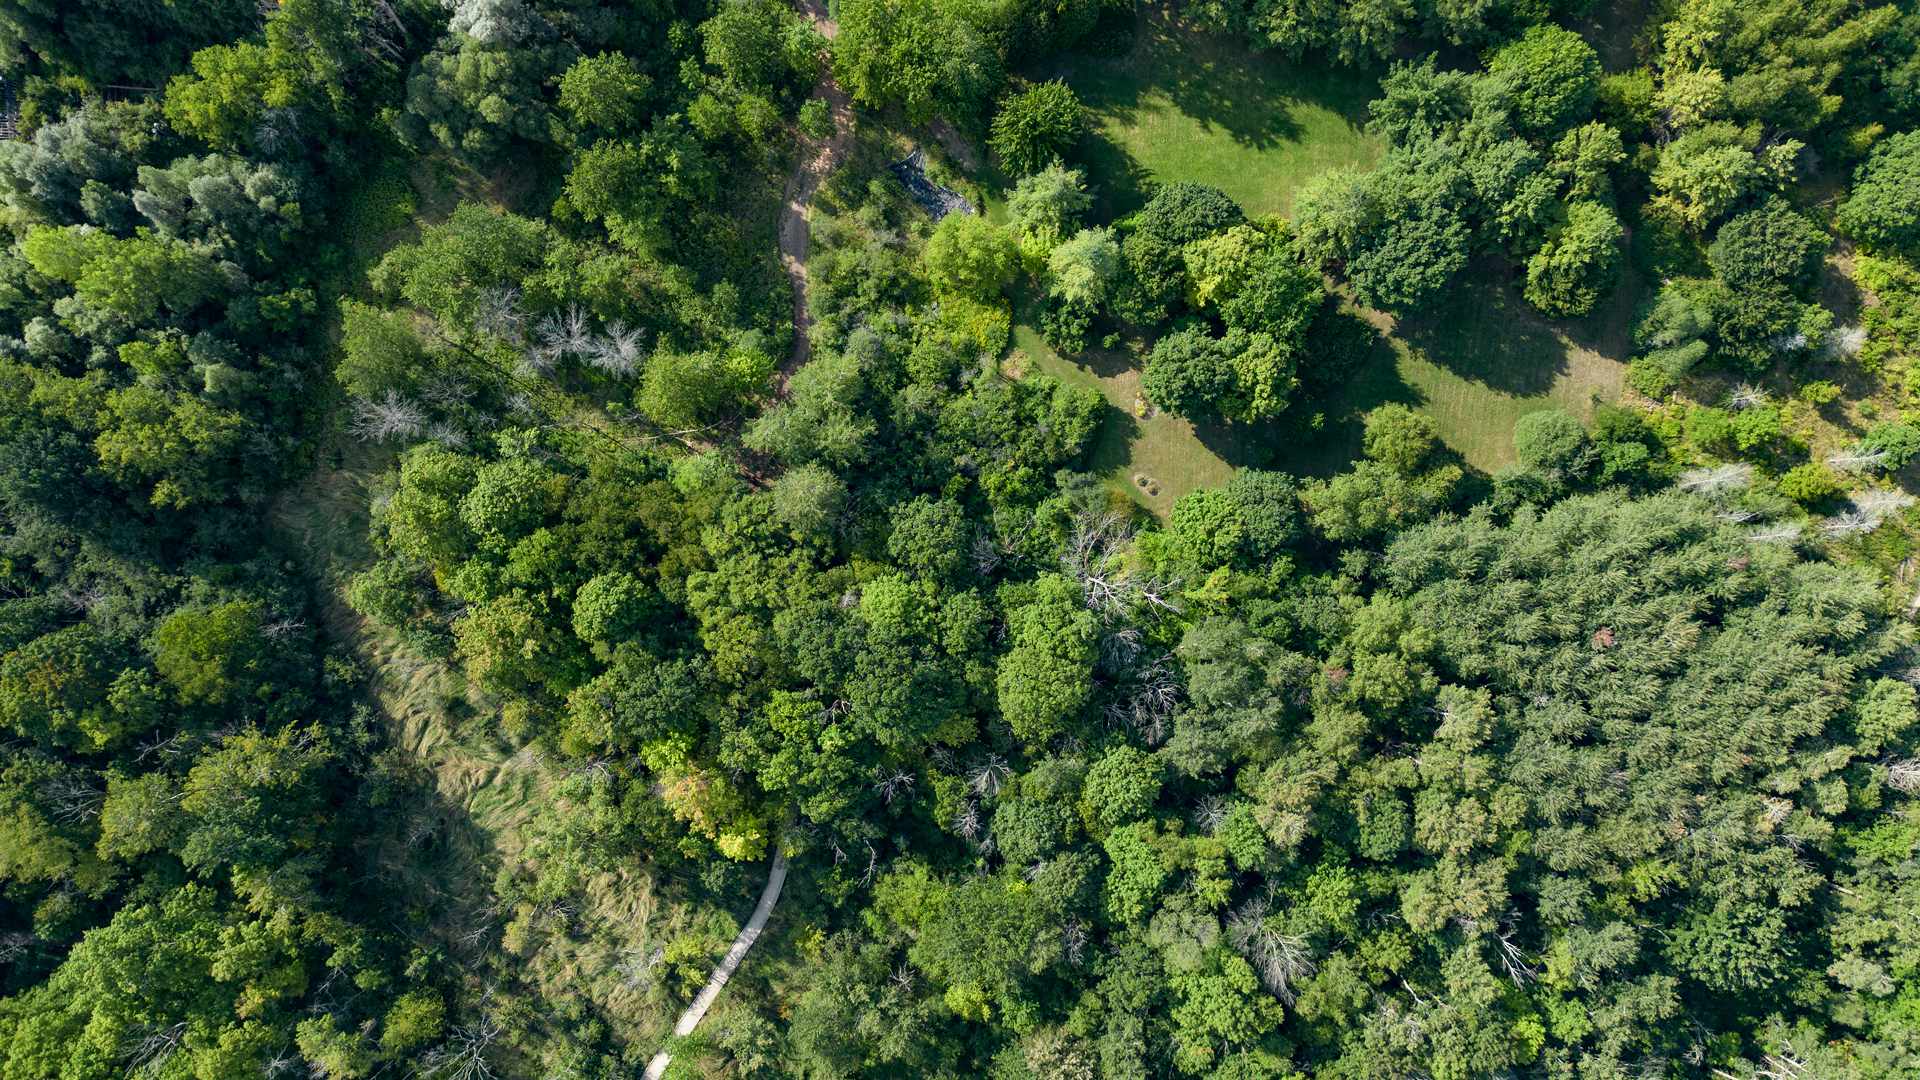 drone photograph of the arboretum forest